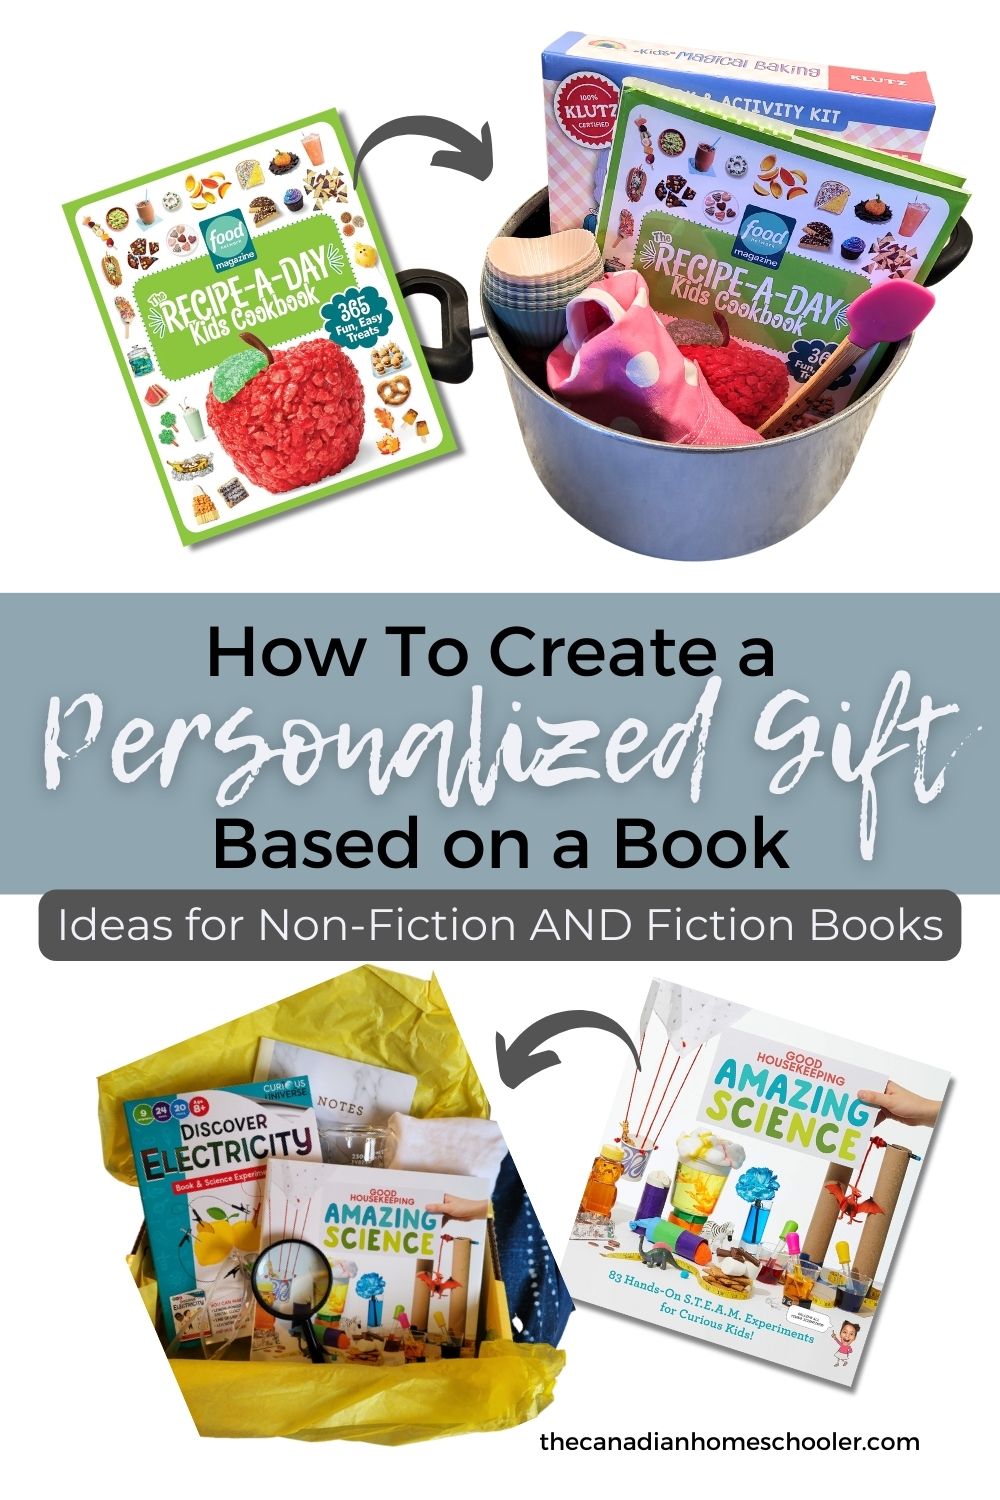 How To Create a Personalized Gift Based on a Book